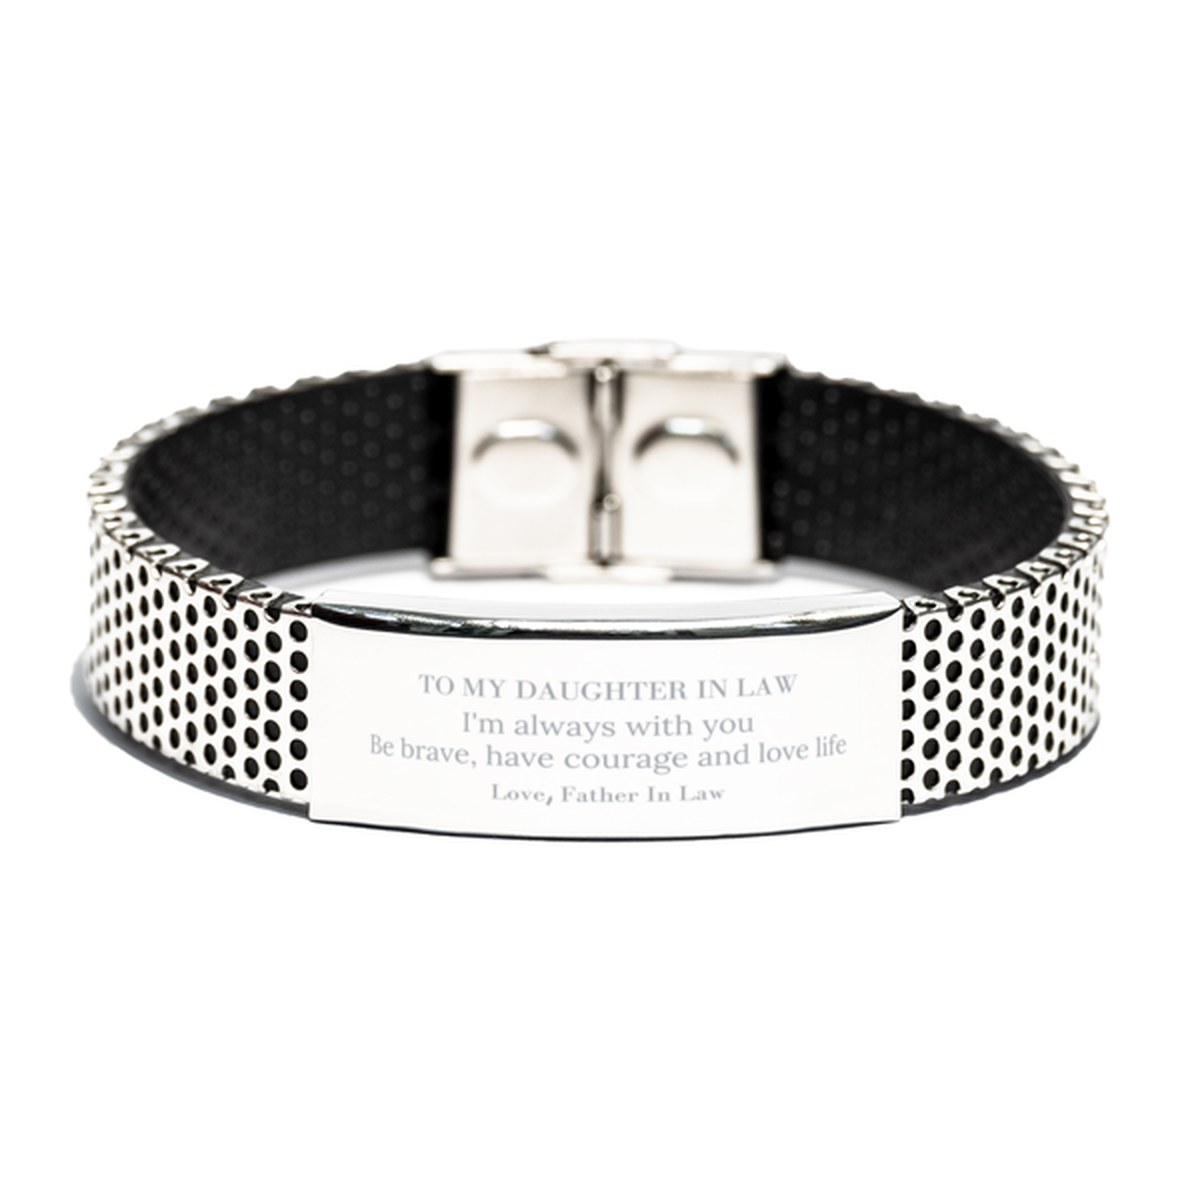 To My Daughter In Law Gifts from Father In Law, Unique Stainless Steel Bracelet Inspirational Christmas Birthday Graduation Gifts for Daughter In Law I'm always with you. Be brave, have courage and love life. Love, Father In Law